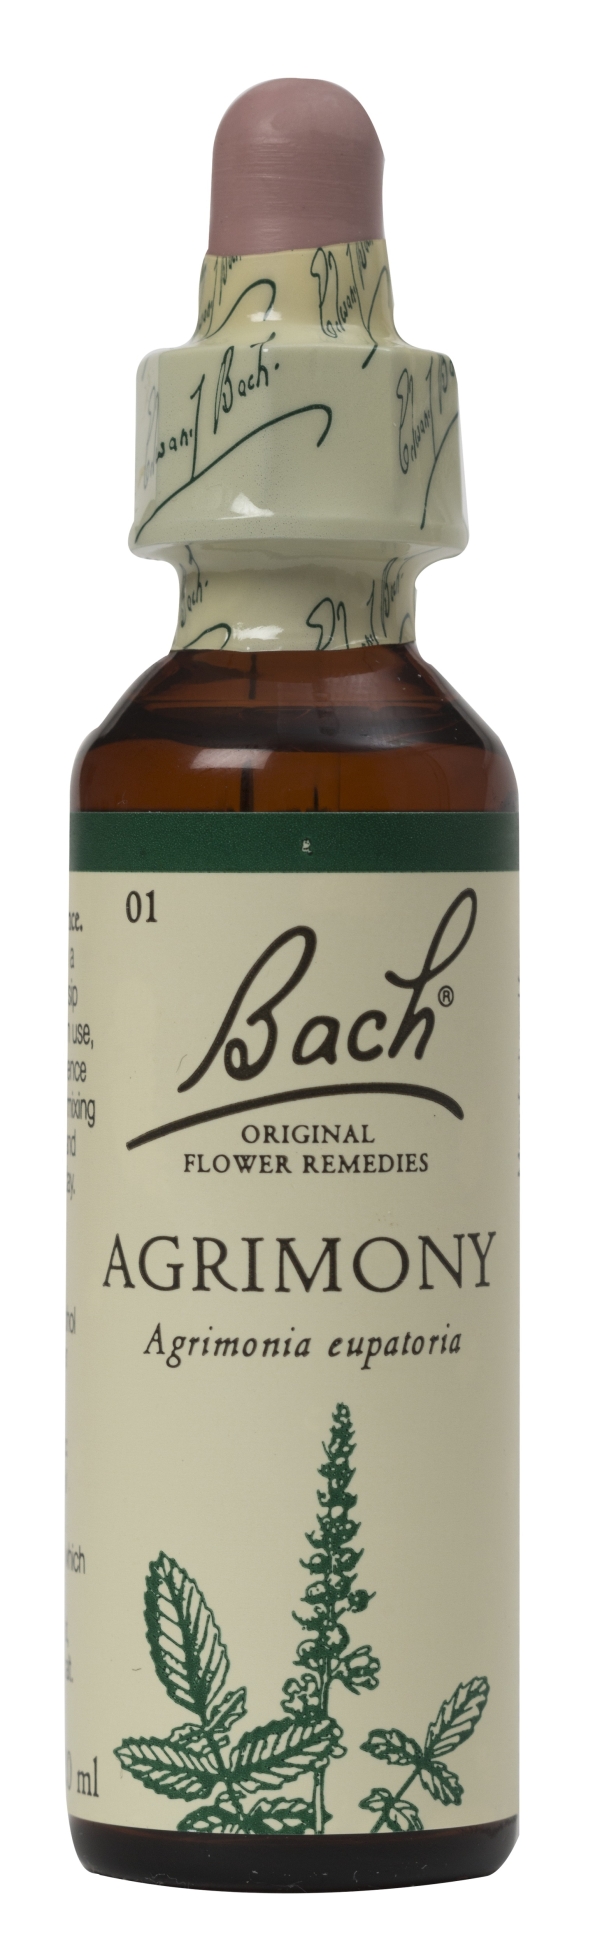 Nelson Bach Flower Remedies: Bach Agrimony Flower Remedy (20ml) available online here